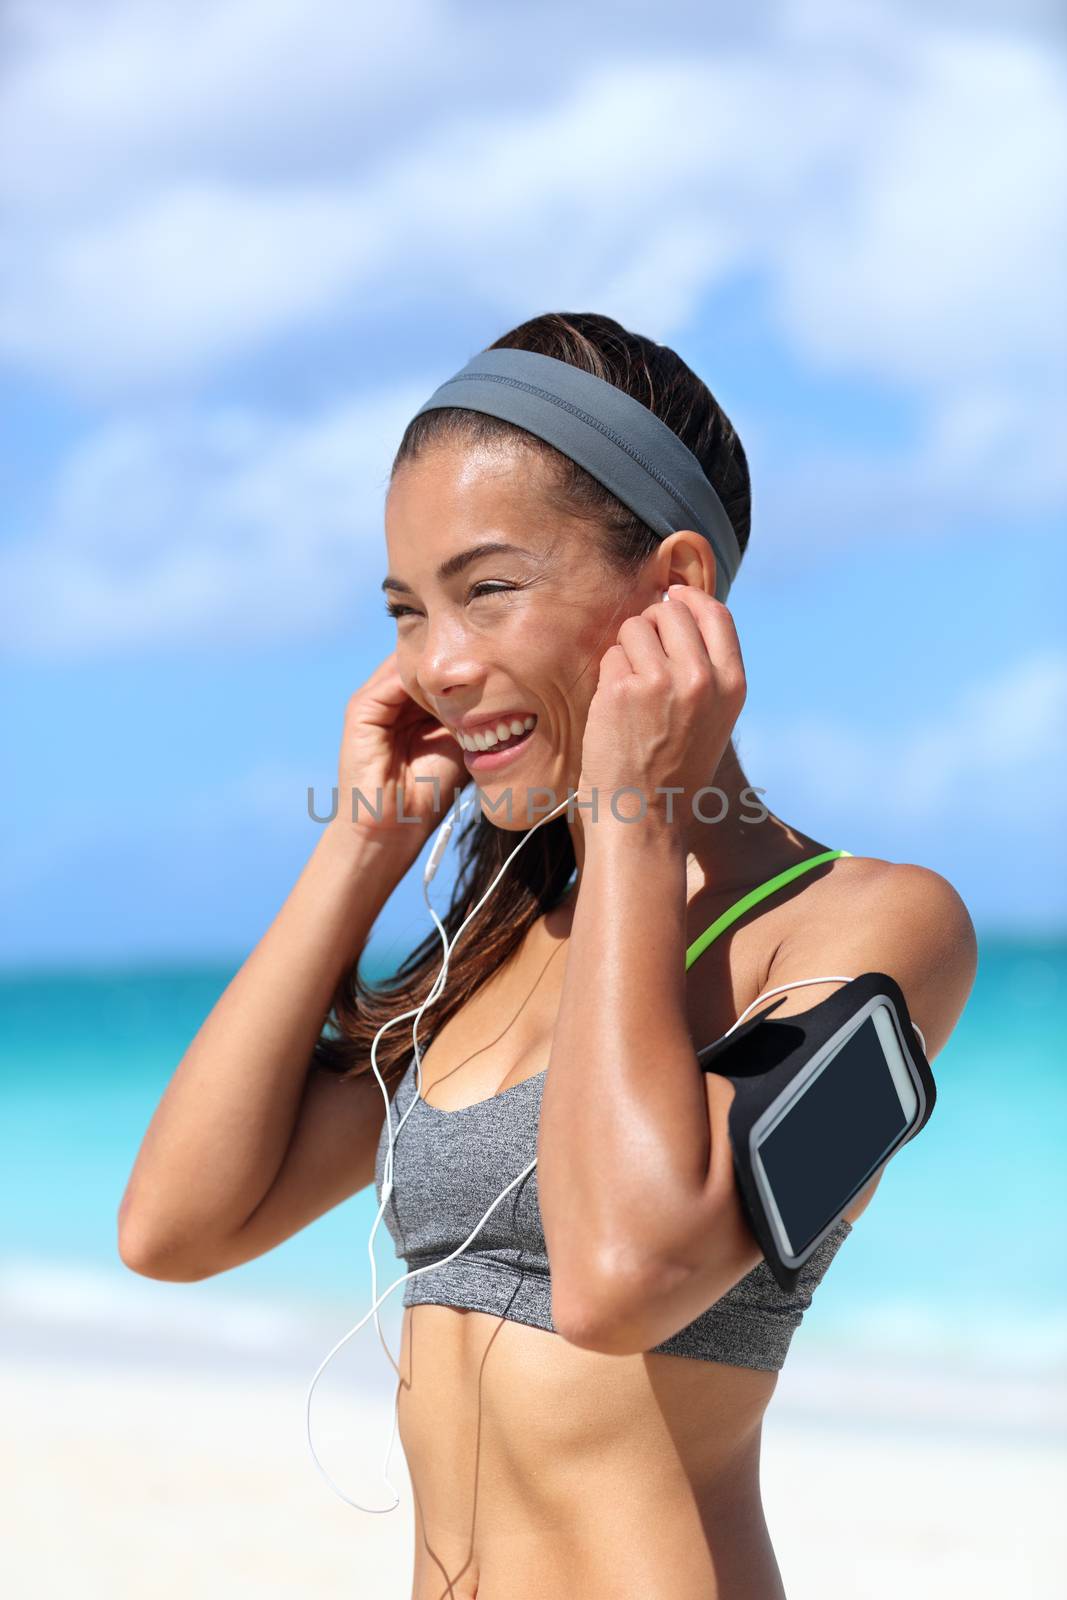 Runner girl wearing earphones and running armband phone arm strap getting ready for run workout. Gesture of putting on headset to listen to music while exercising on sunny beach summer vacation.